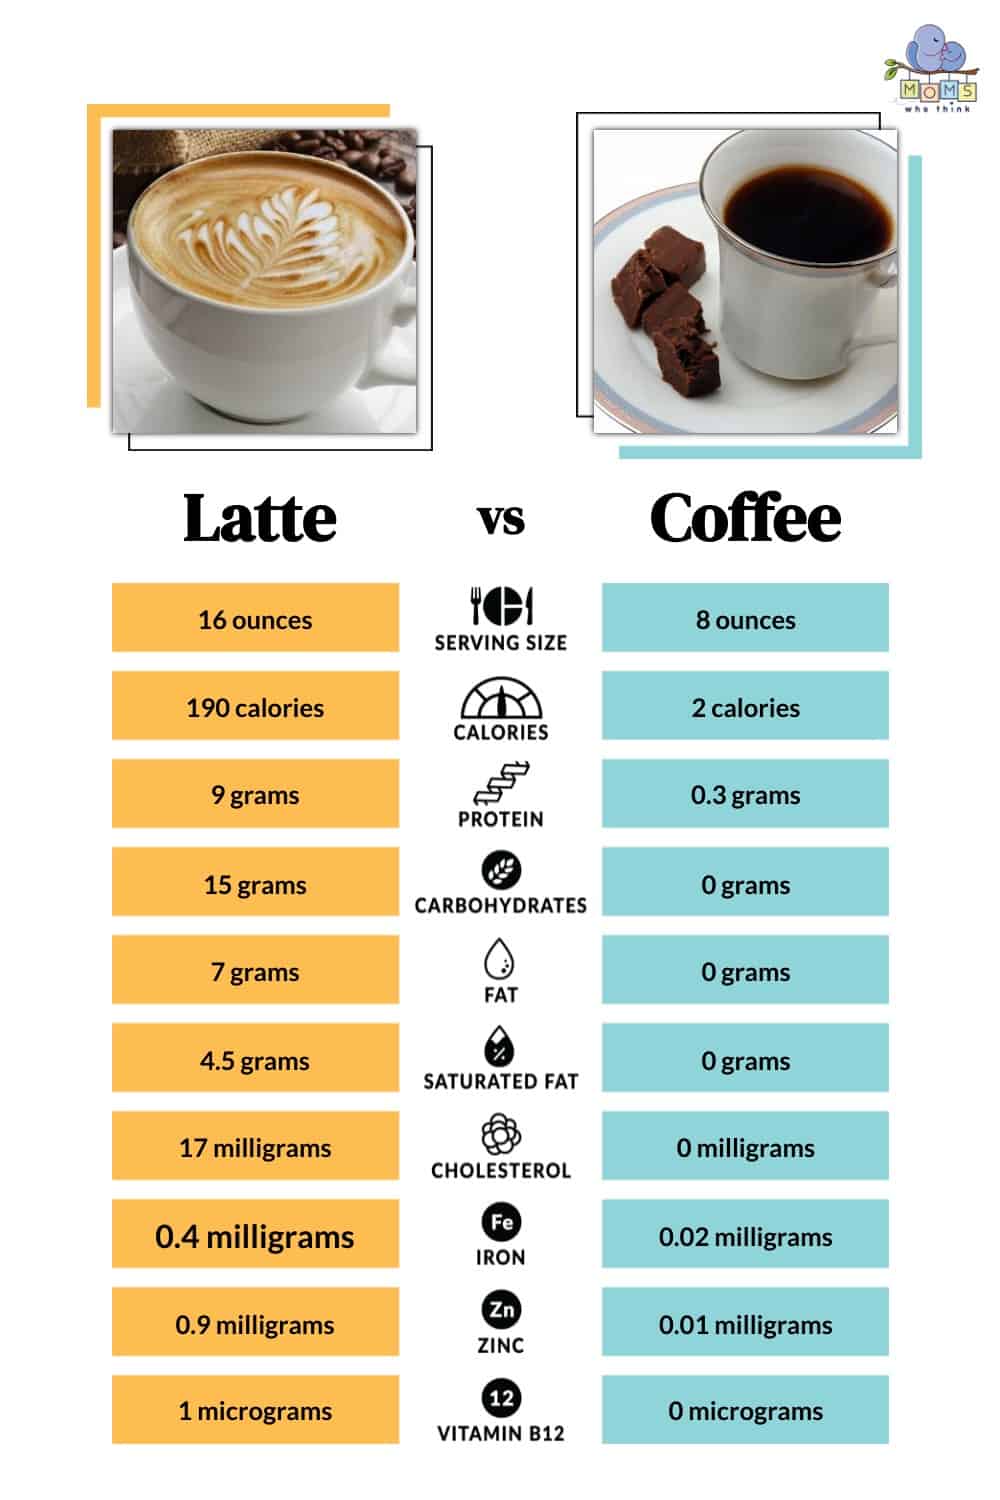 Latte vs Coffee Nutritional Facts